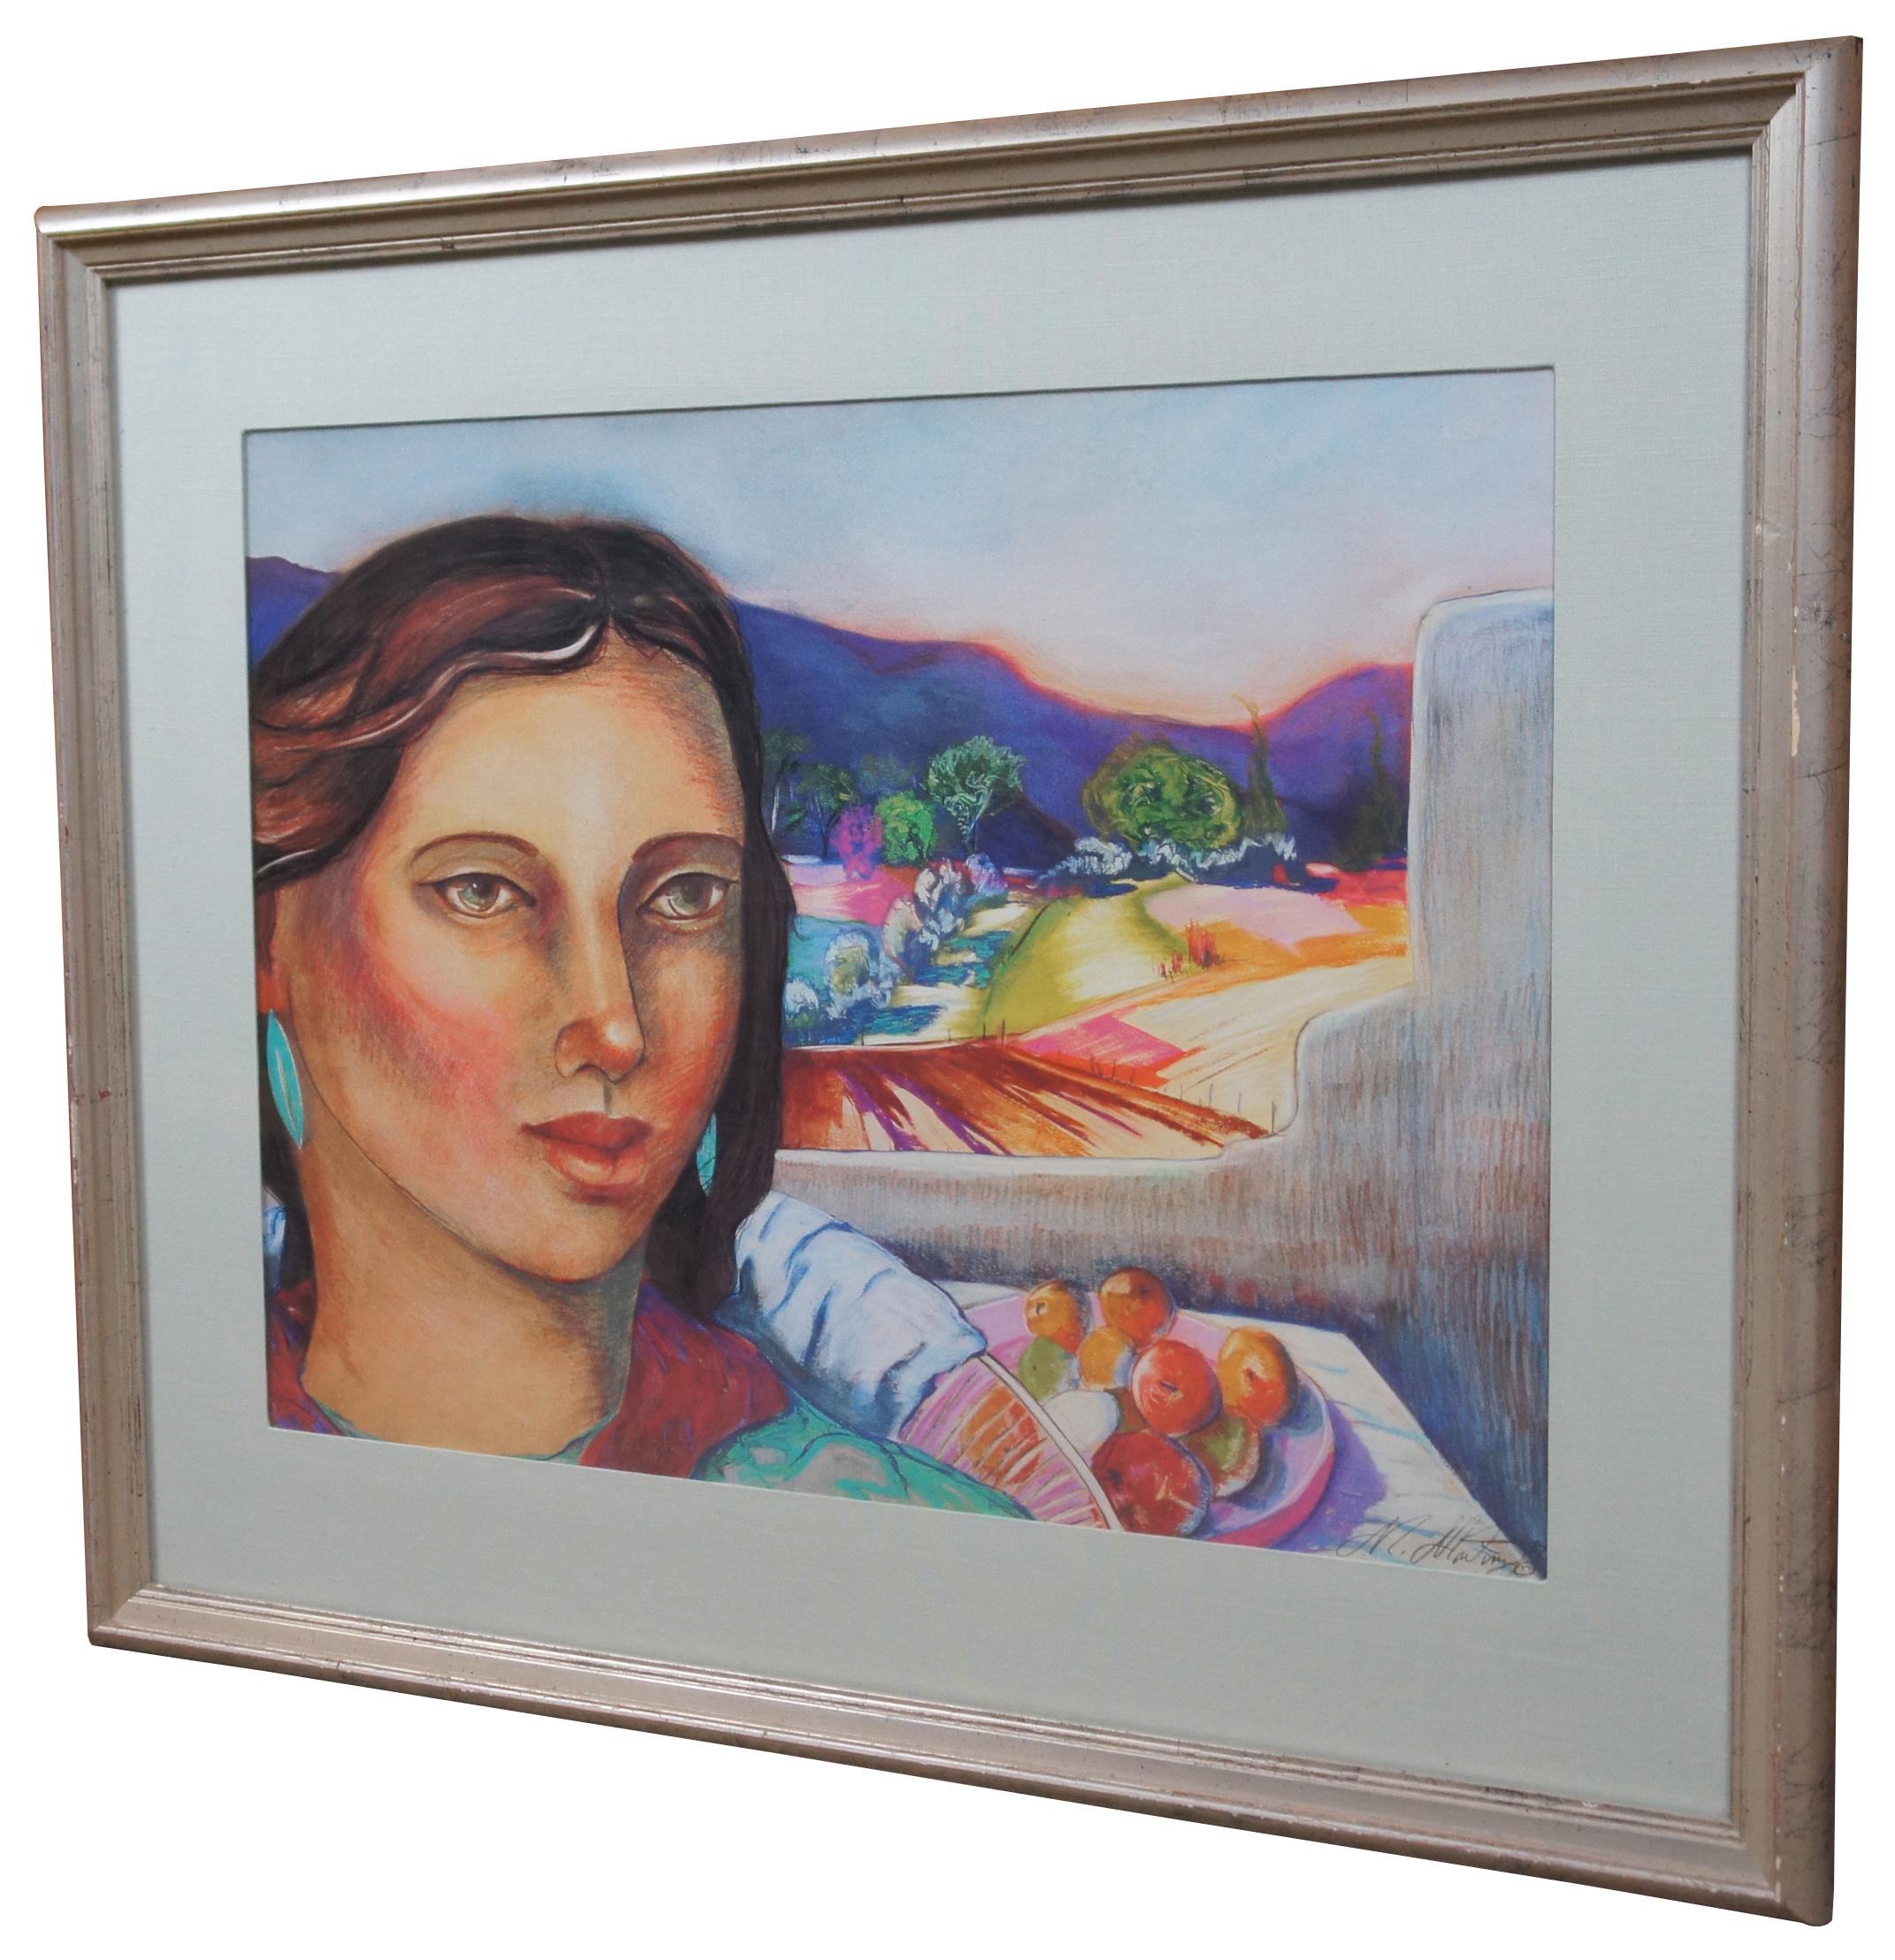 Vintage 1987 lithograph print by artist Miguel Martinez signed in stone, showing a woman on a balcony with a southwestern landscape of fields and hills and fruit. “The youngest son of Hispanic parents, Miguel Martinez was born in New Mexico in